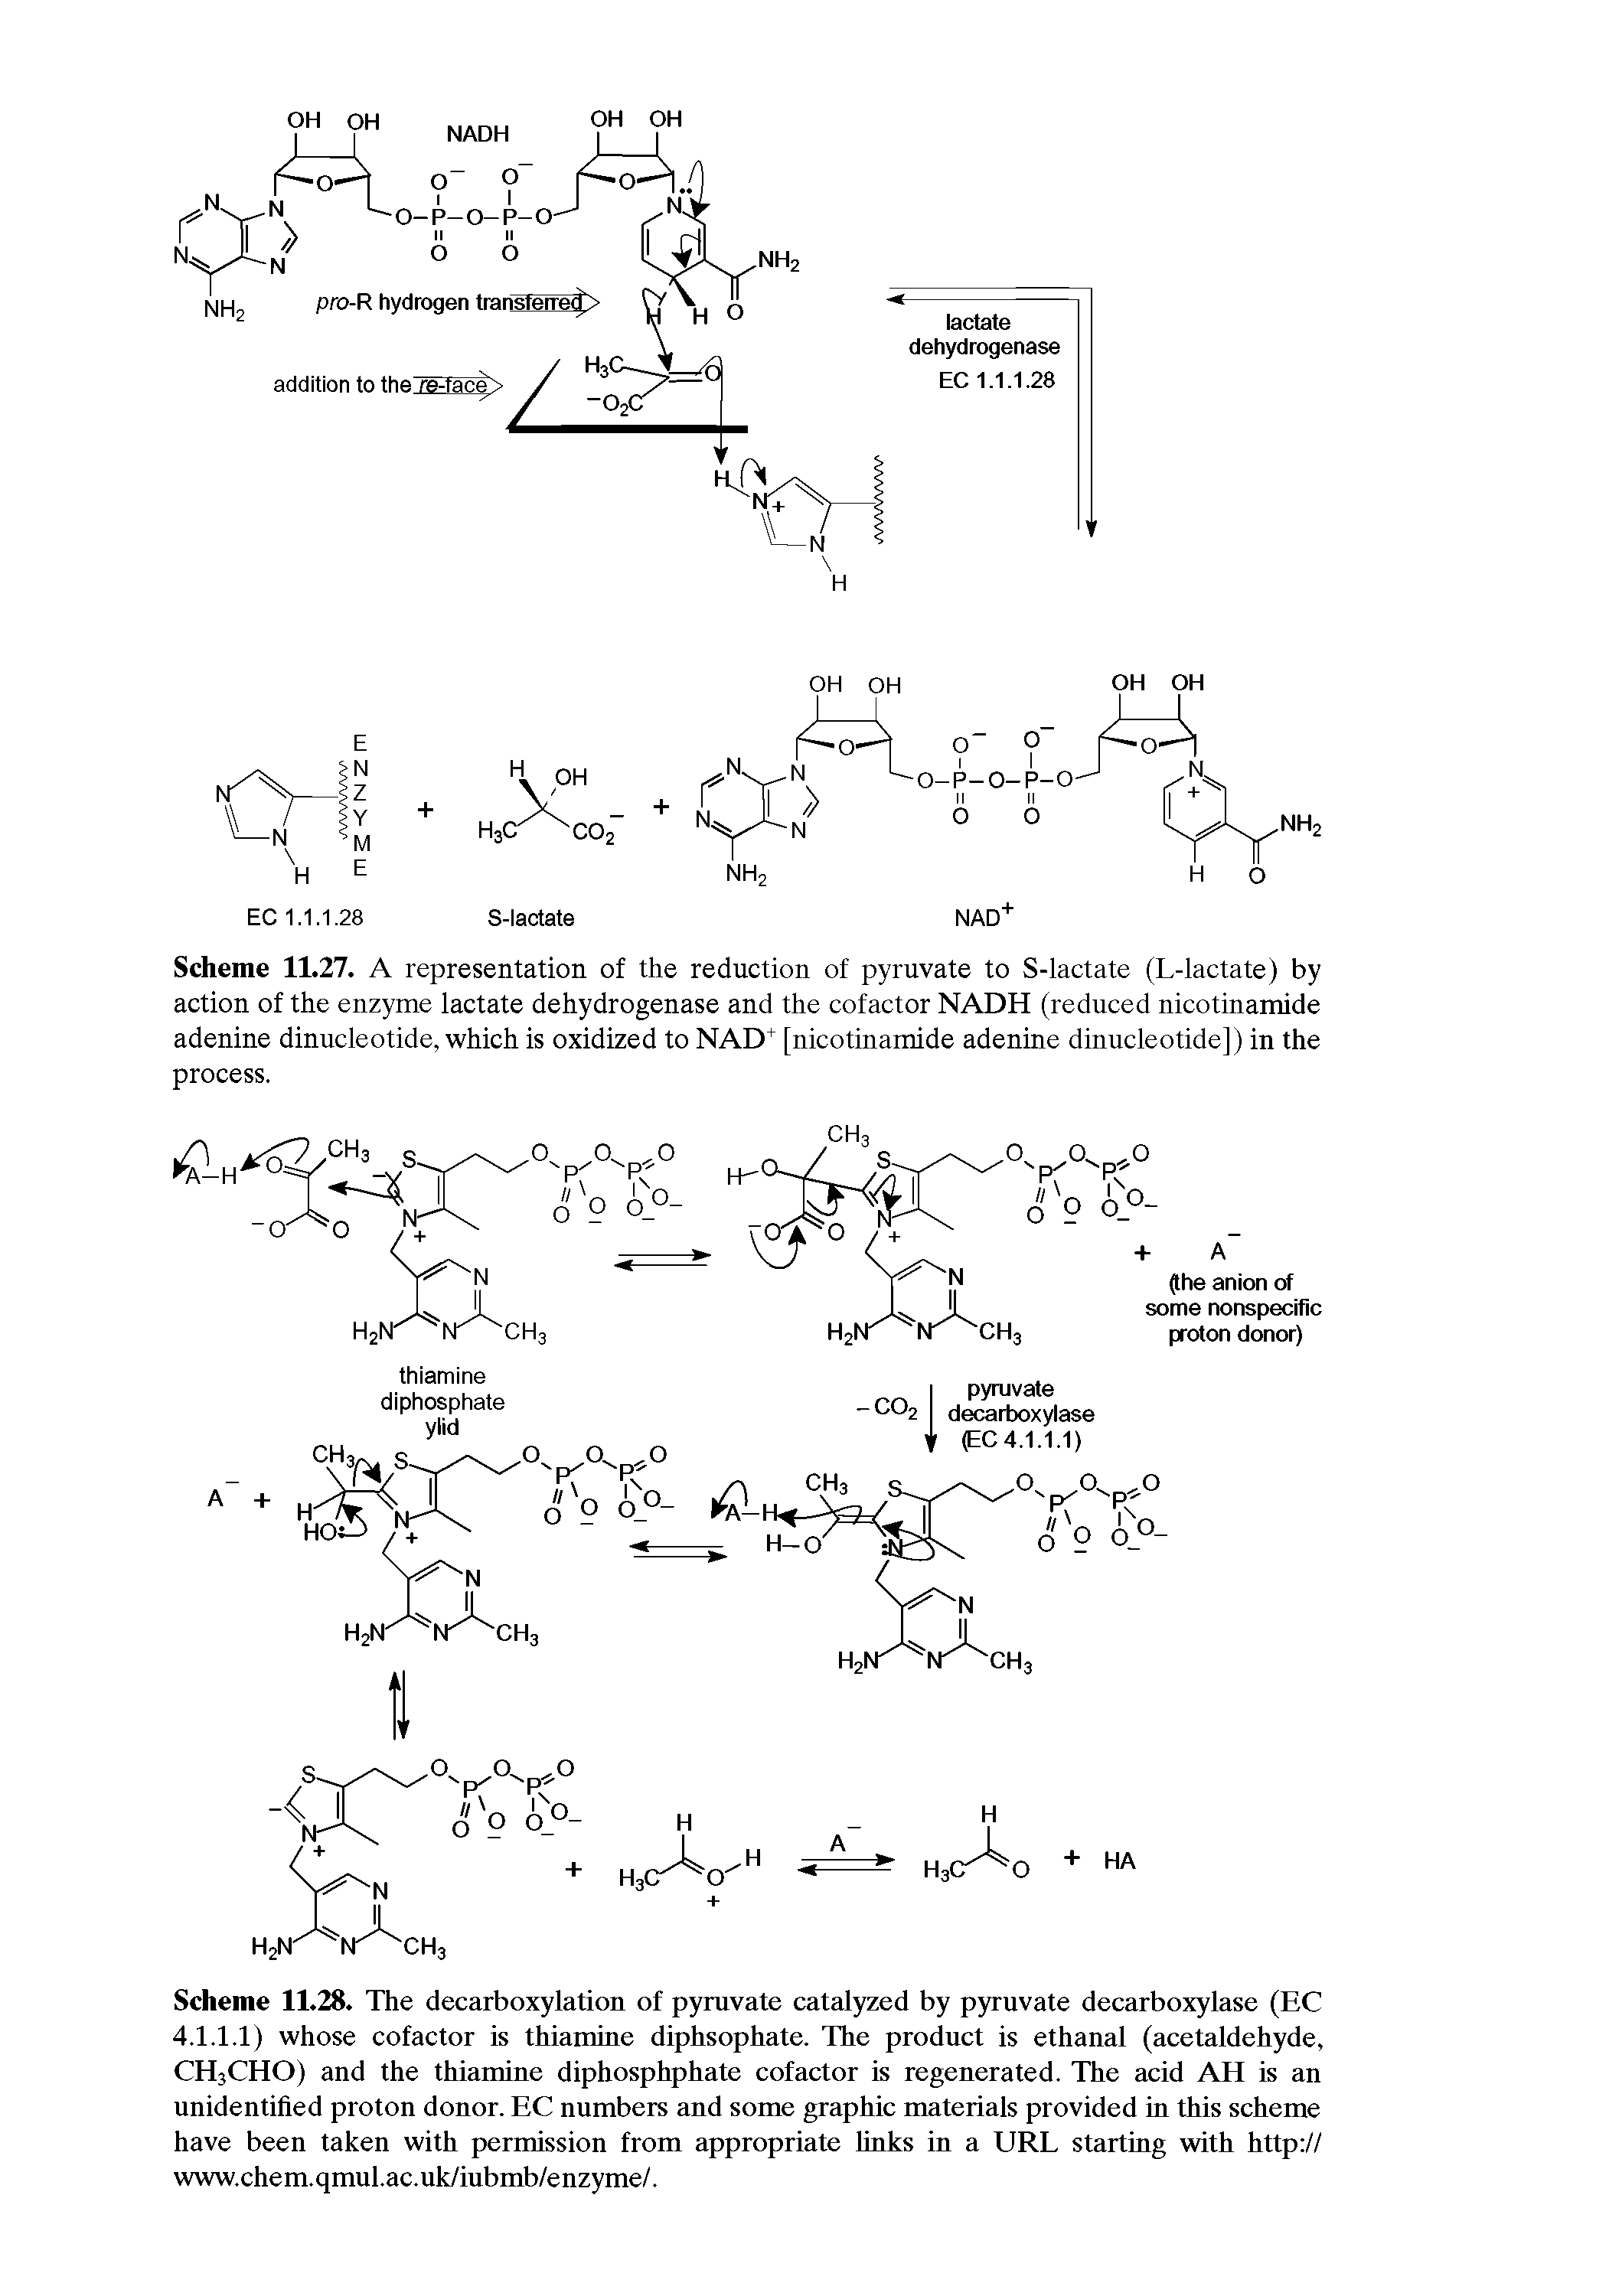 Scheme 11.27. A representation of the reduction of pyruvate to S-lactate (L-lactate) by action of the enzyme lactate dehydrogenase and the cofactor NADH (reduced nicotinamide adenine dinucleotide, which is oxidized to NAD [nicotinamide adenine dinncleotide]) in the process.